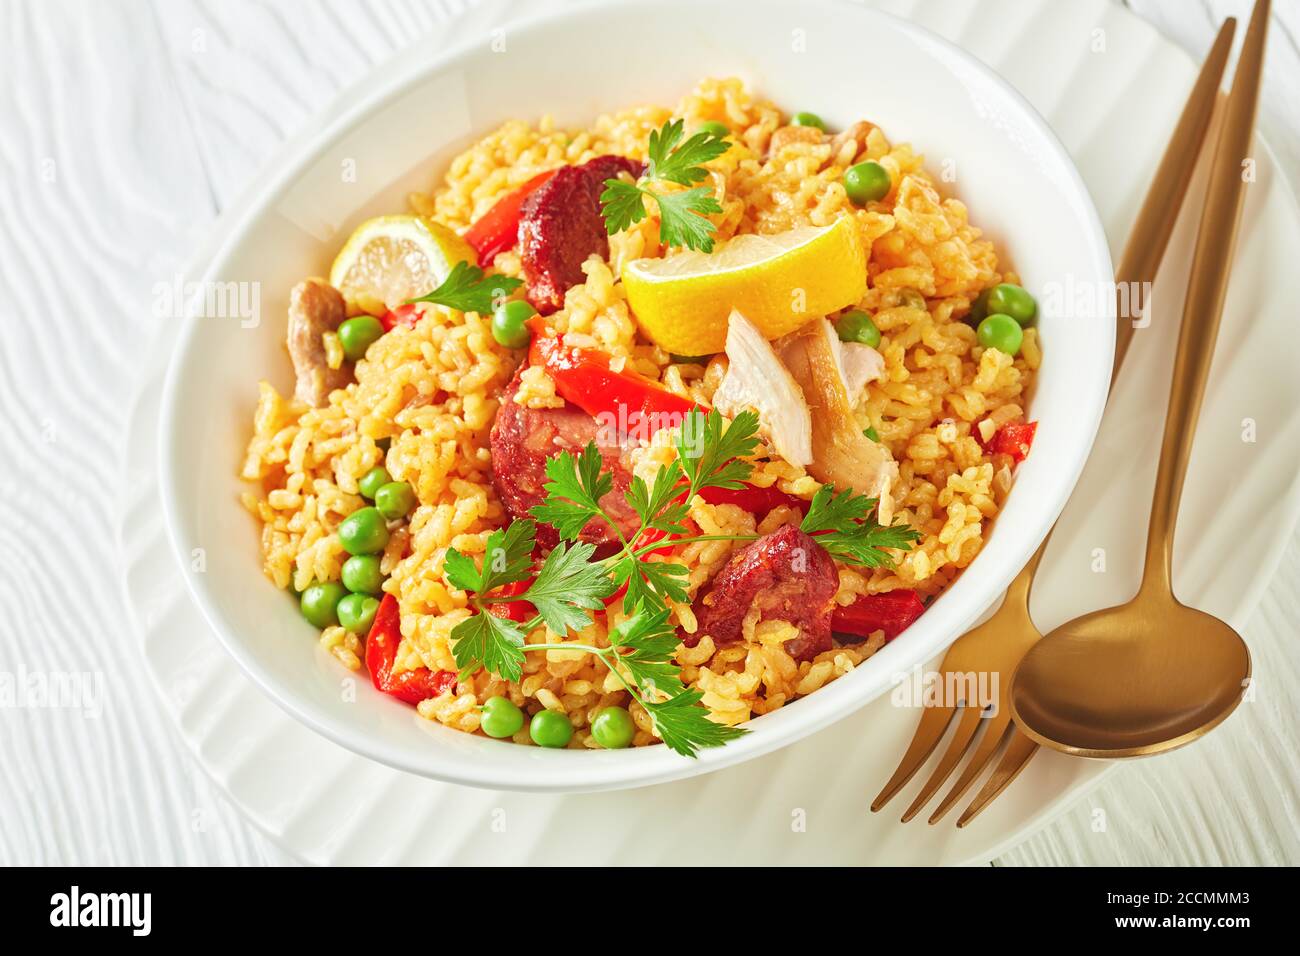 portion of spanish chicken paella with valencian bomba rice, chicken thigh meat, chorizo sausages, vegetables and spices served on a white plate on a Stock Photo